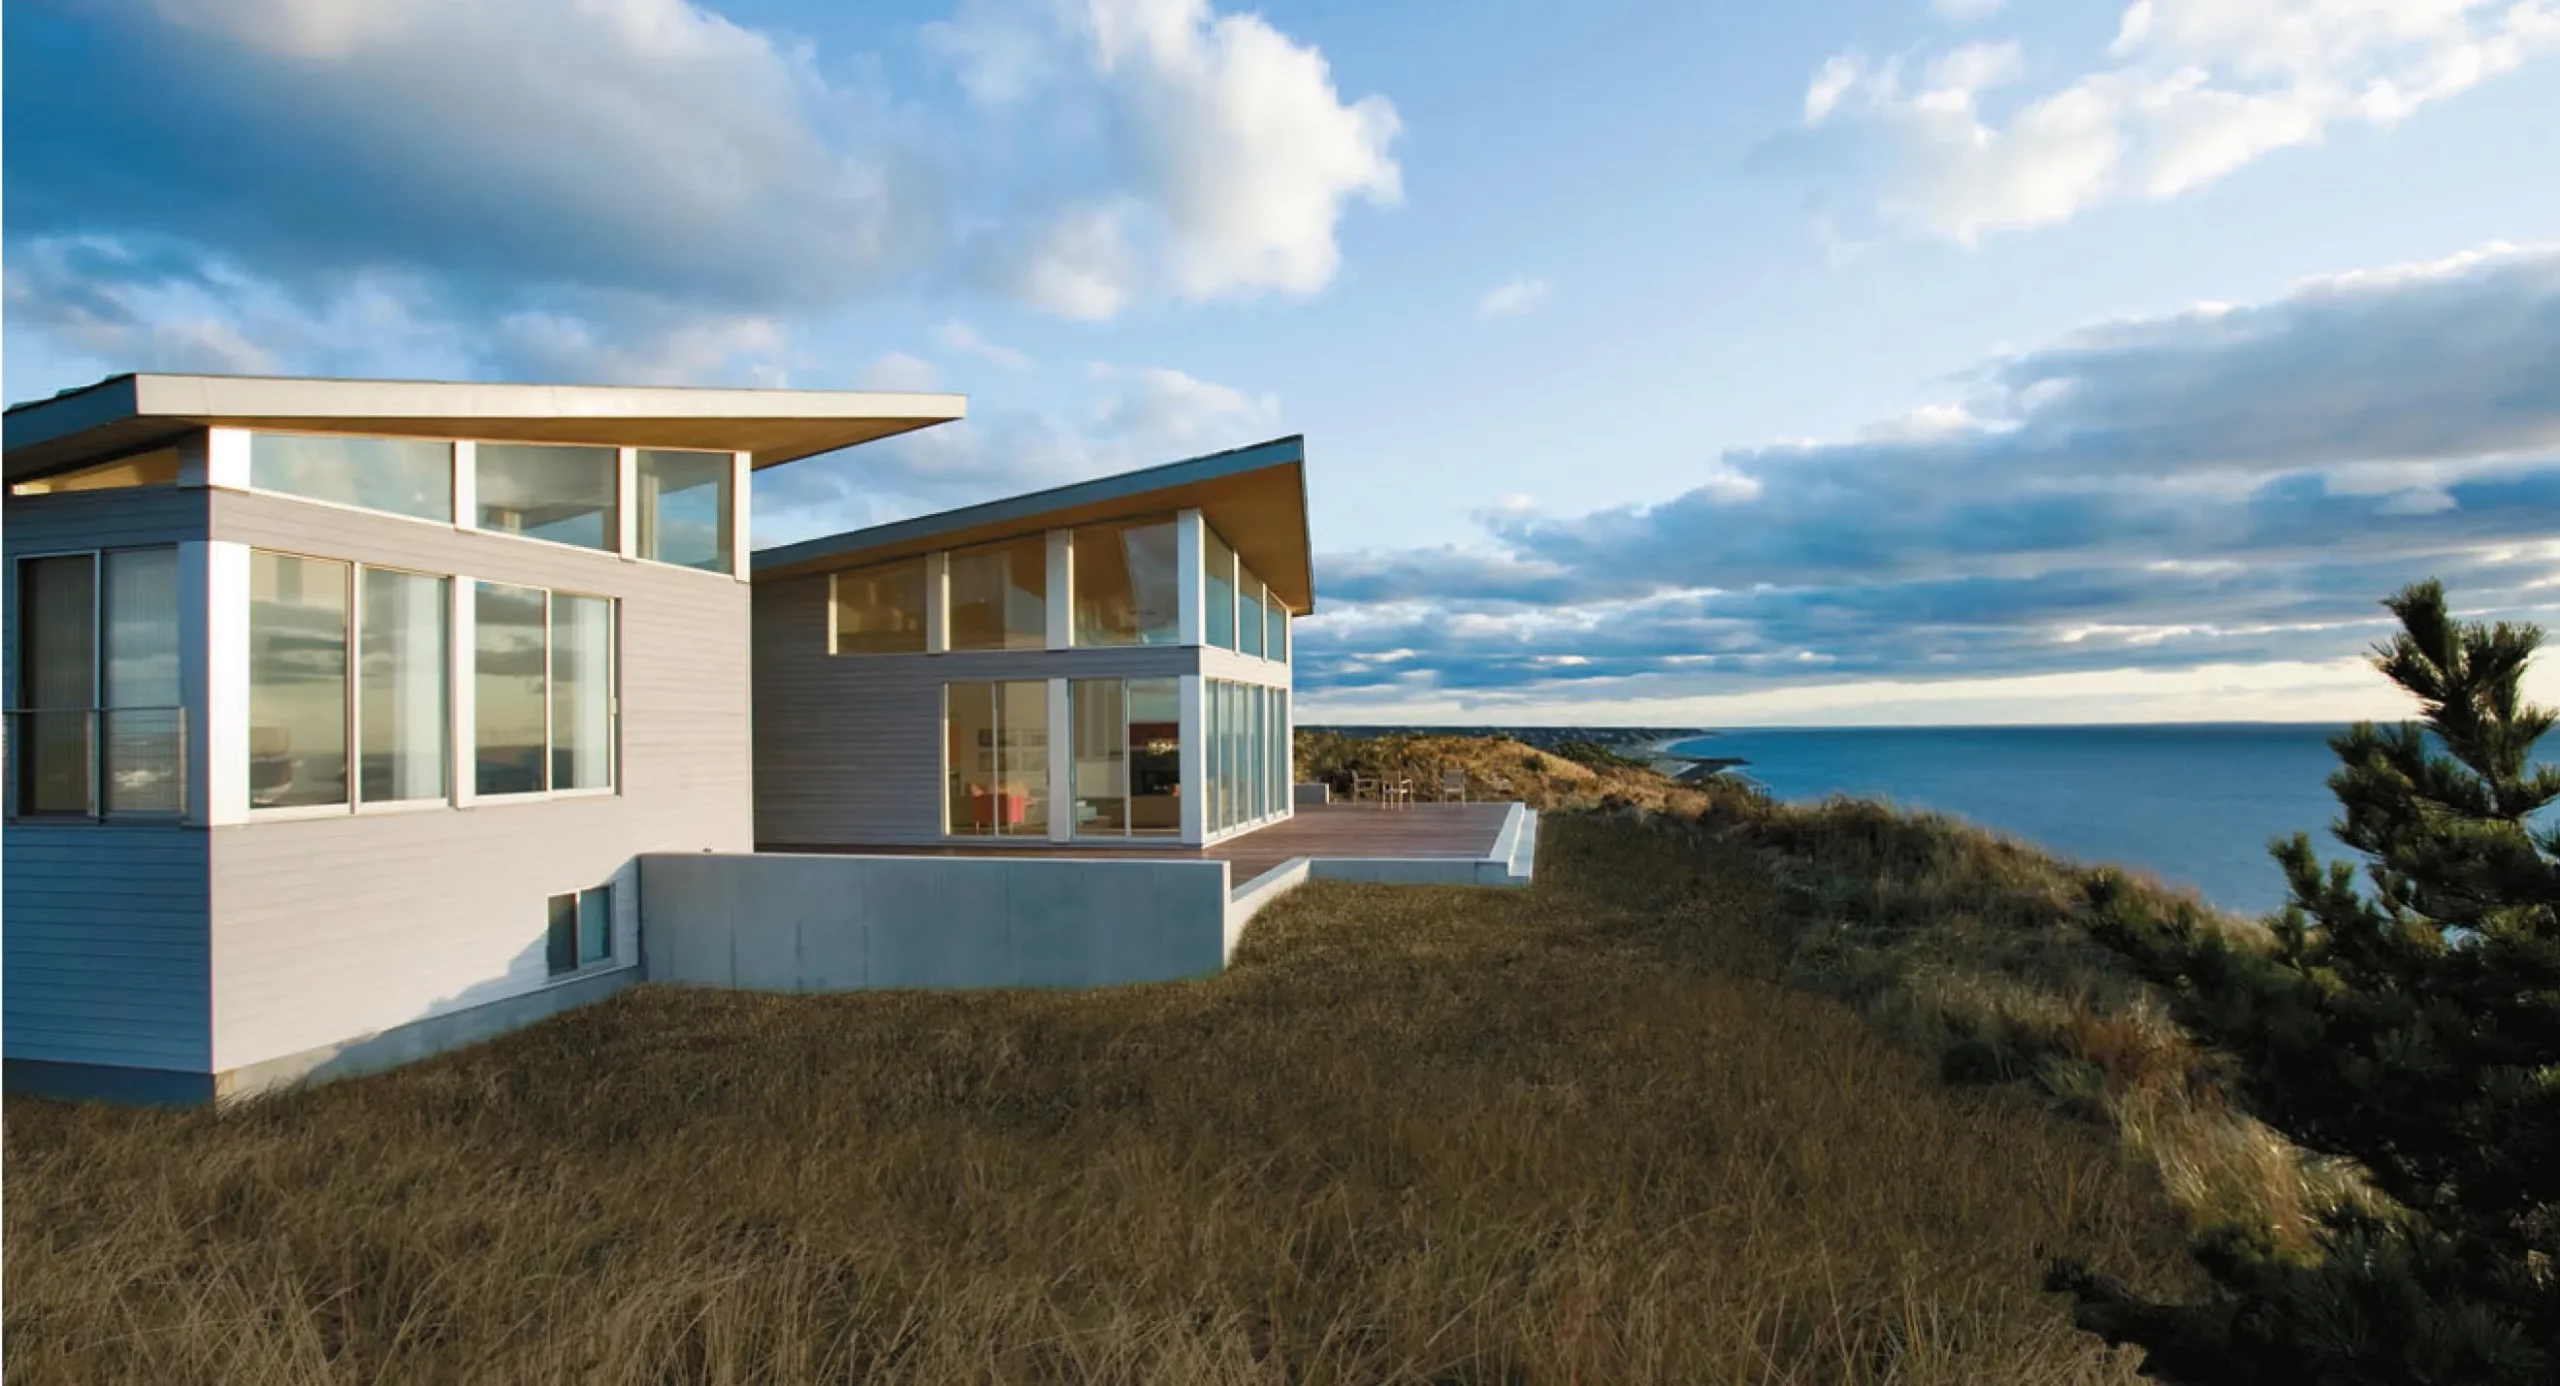 Oceanic Architecture: Coastal Homes and Design Elements